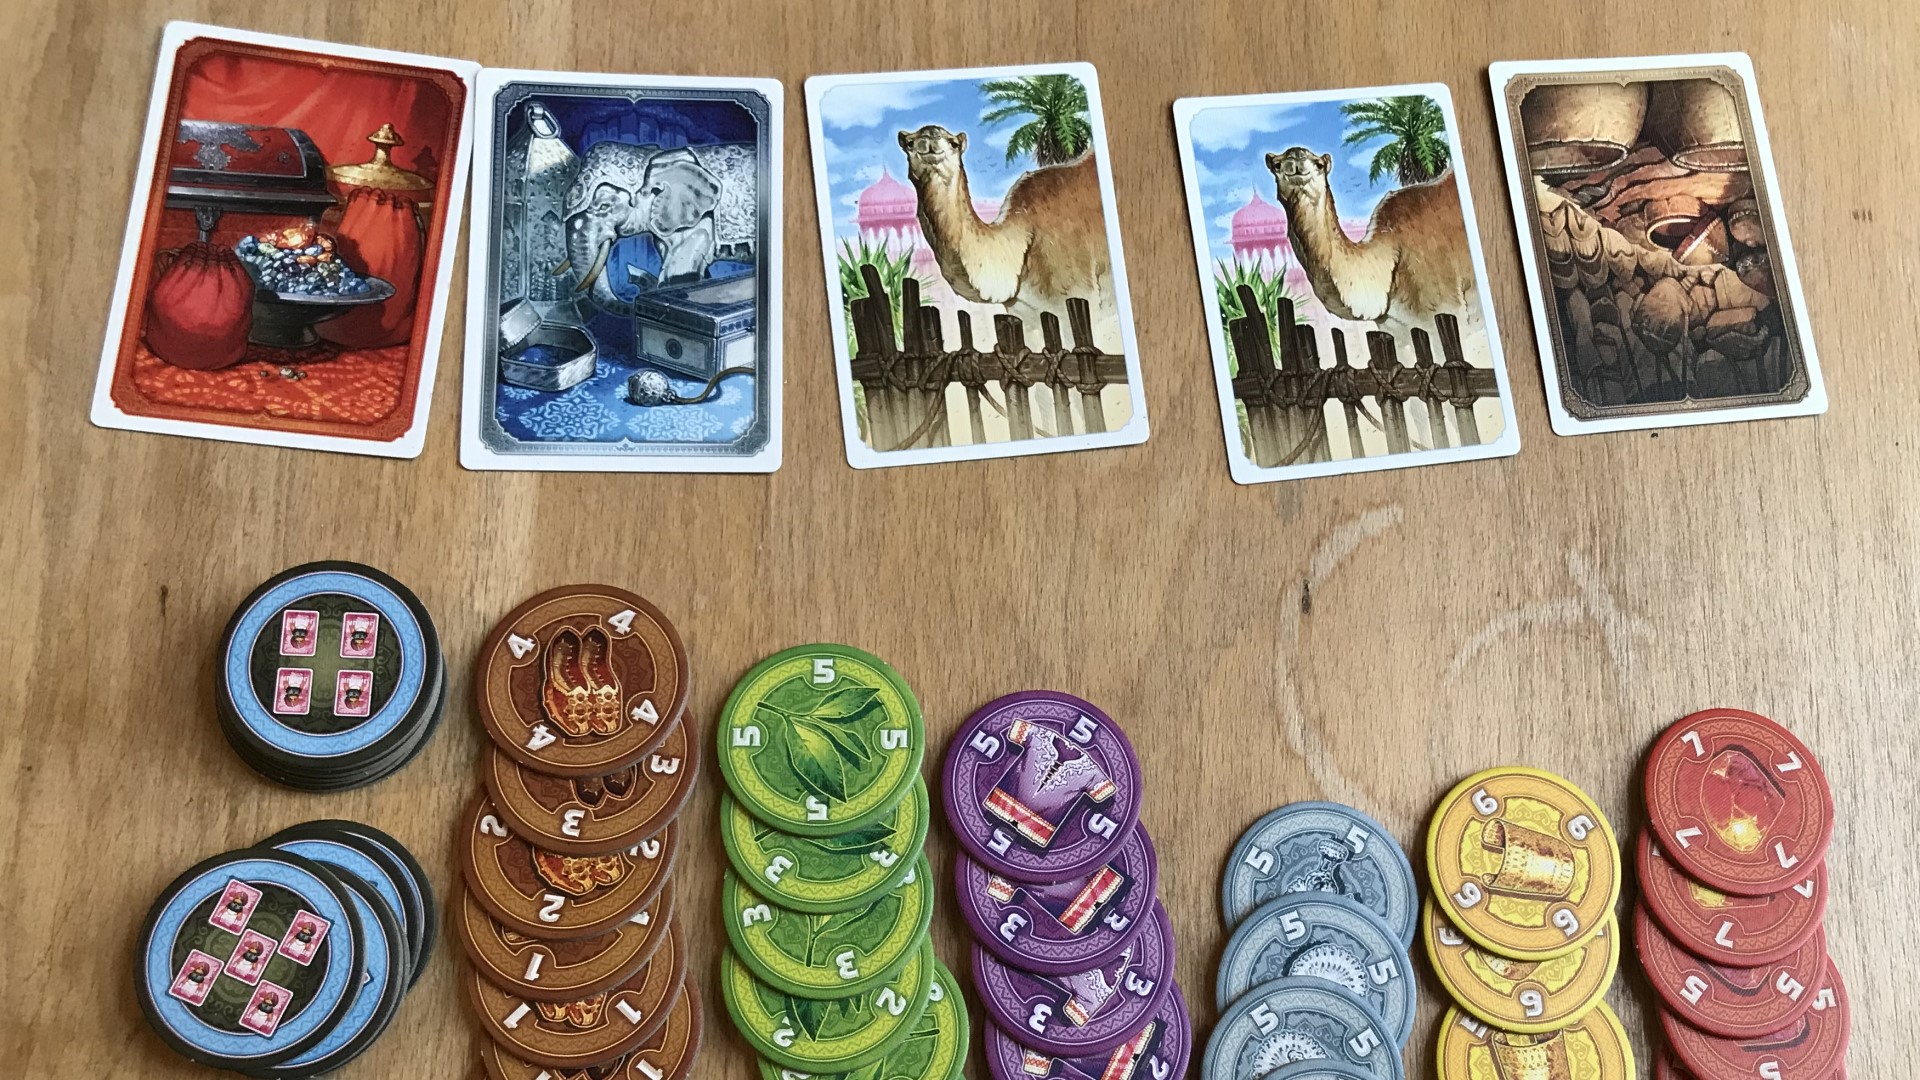 Jaipur board game - five cards showing goods and stacks of goods tokens